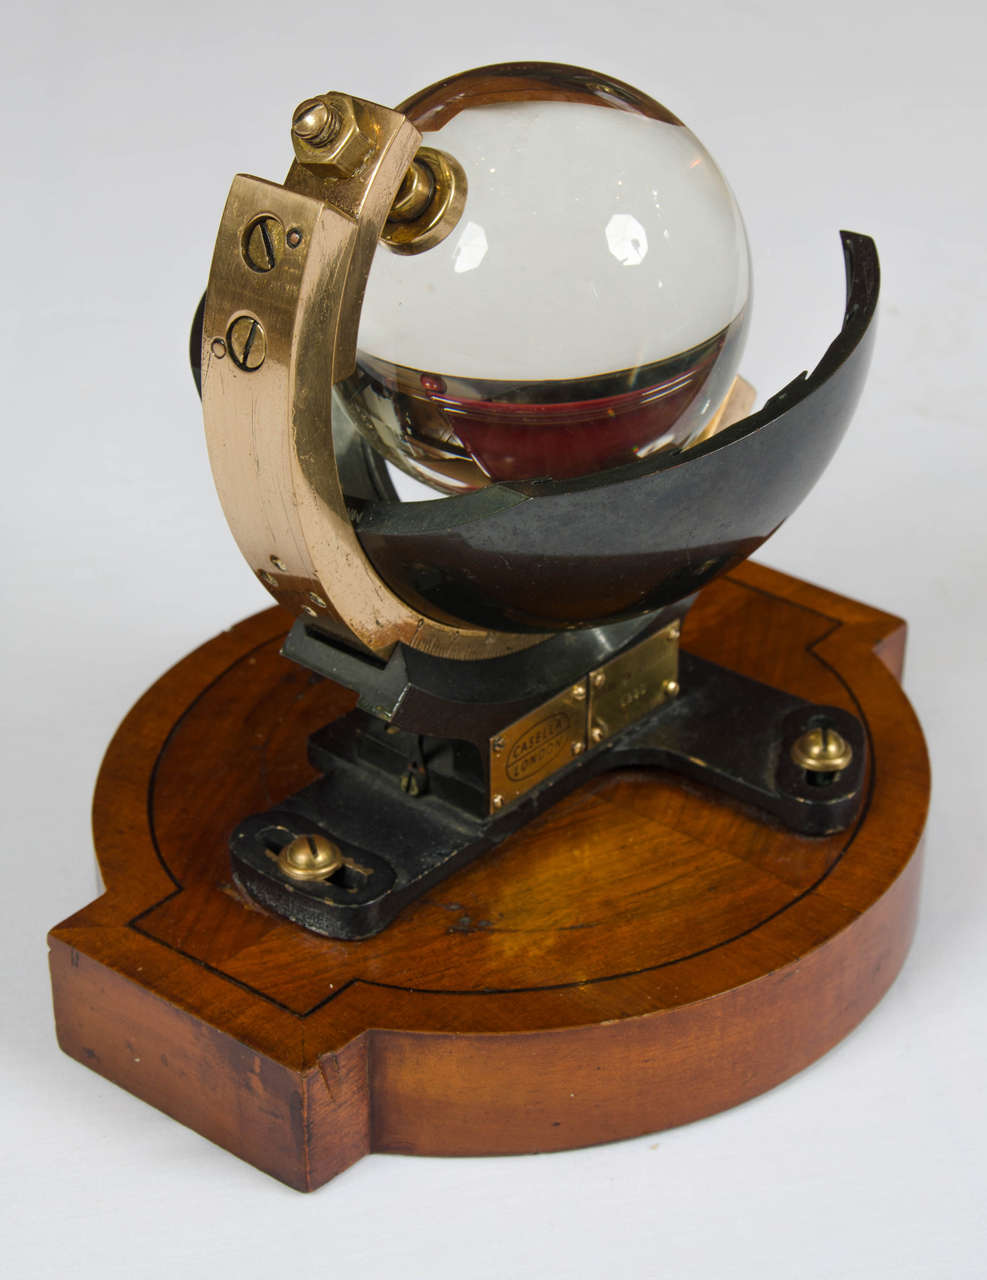 Campbell–Stokes sphere sunshine recorder by Casella of London, mounted on golden oak base, circa 1930. 

Campbell Stokes Sunshine recorder (sometimes called a Stokes sphere) by Casella, London, No.8351. The 4inch glass sphere is mounted in a brass